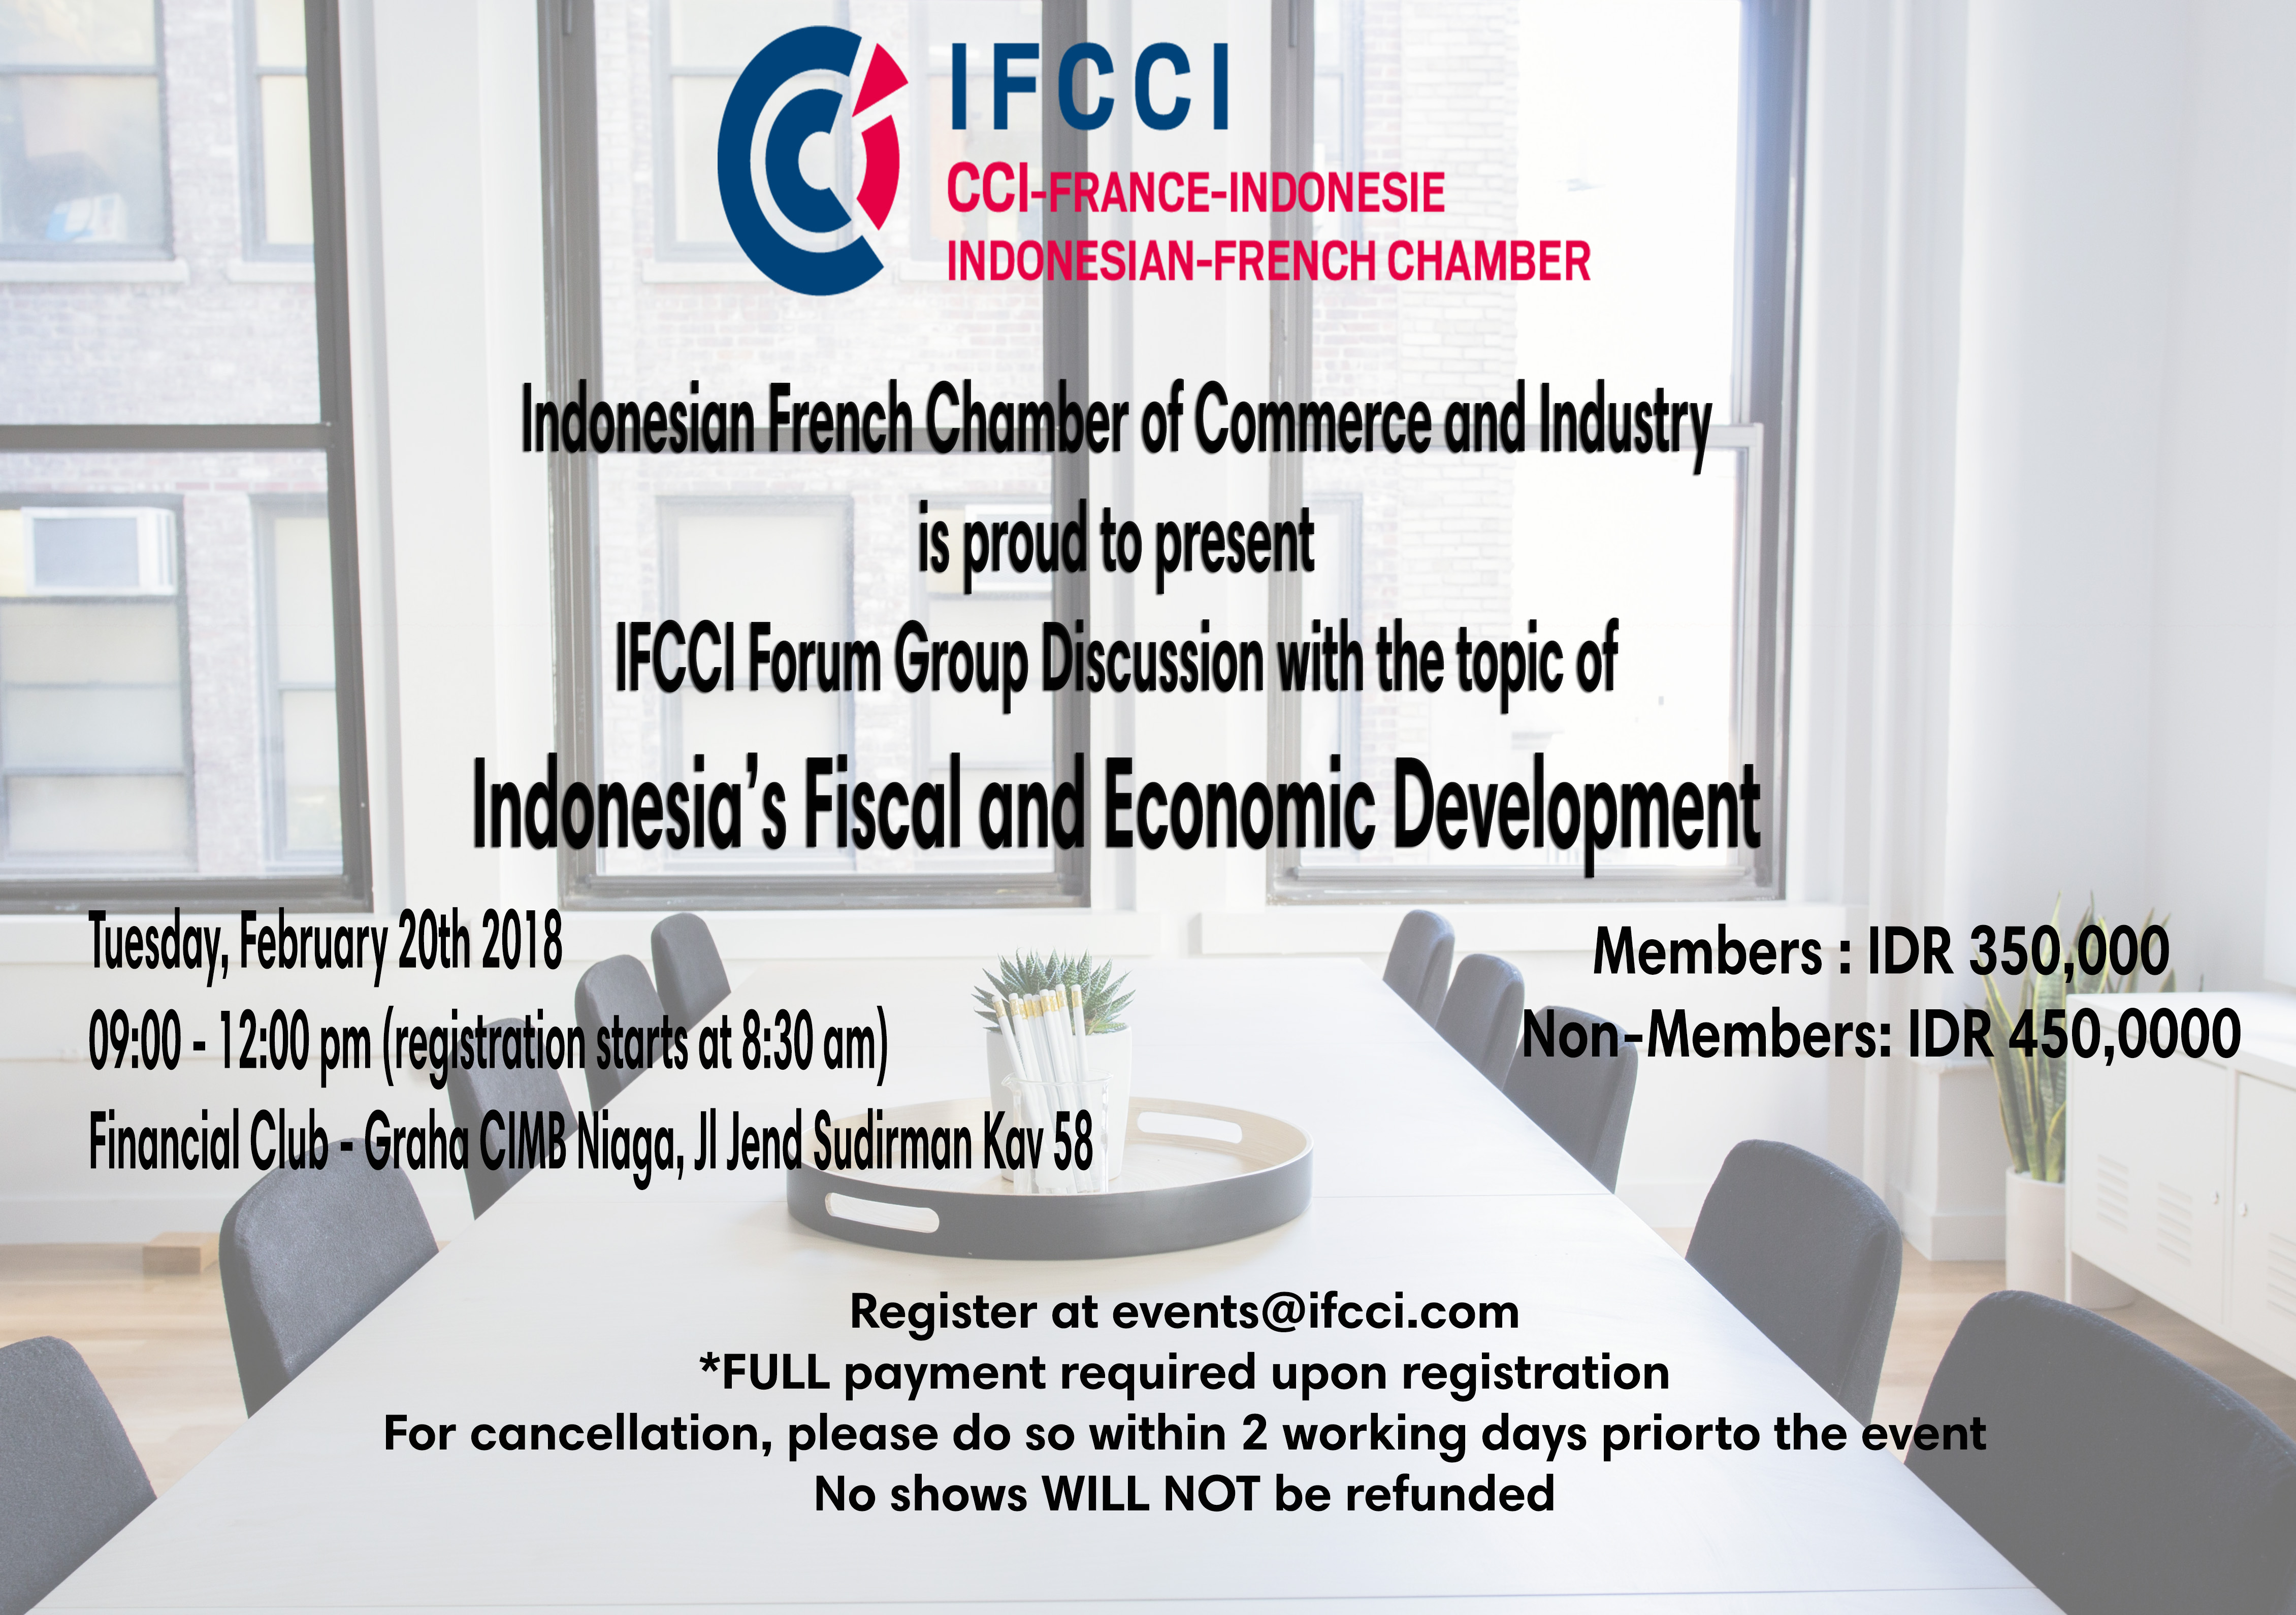 IFCCI FORUM GROUP DISCUSSION